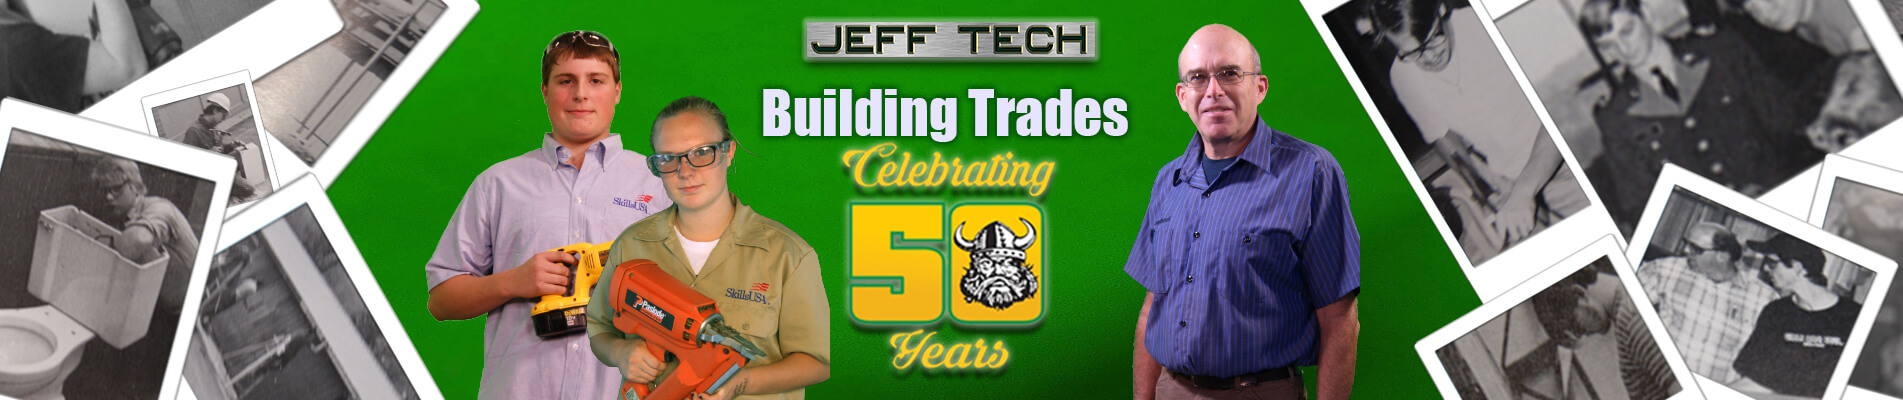 Jeff Tech Building Trades Celebrating 50 Years. Learn more about our CTE Programs.